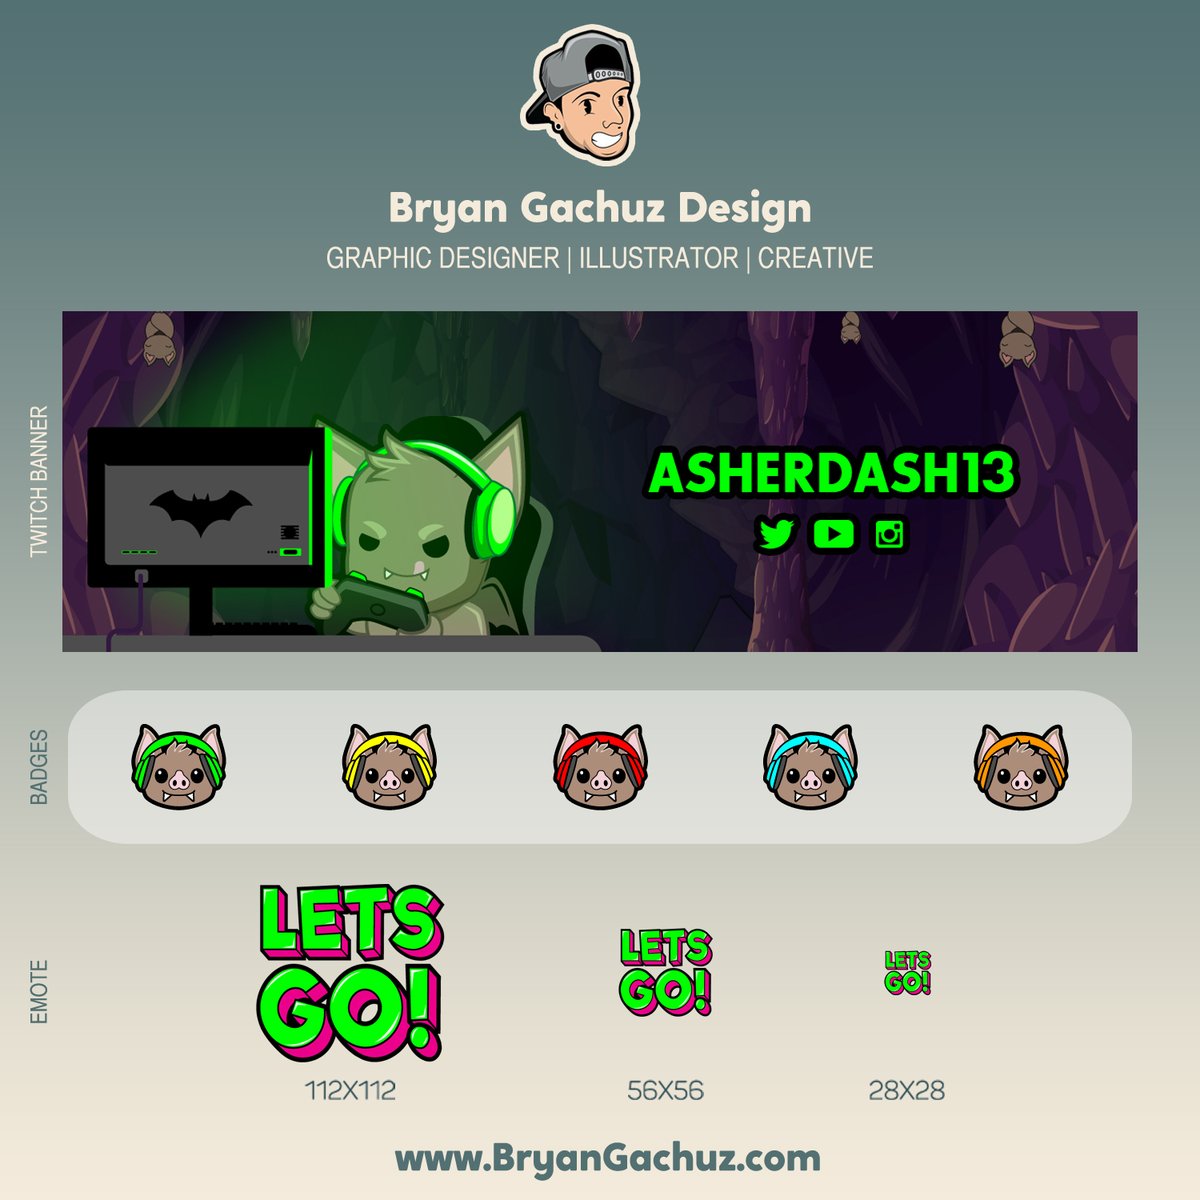 Coming Back Soon A Twitter Here Is A Banner I Made Using An Emote Design I Already Made For Asherdash 13 Also Are Some Cute Bat Badges And Let S Go Emote Whatever You